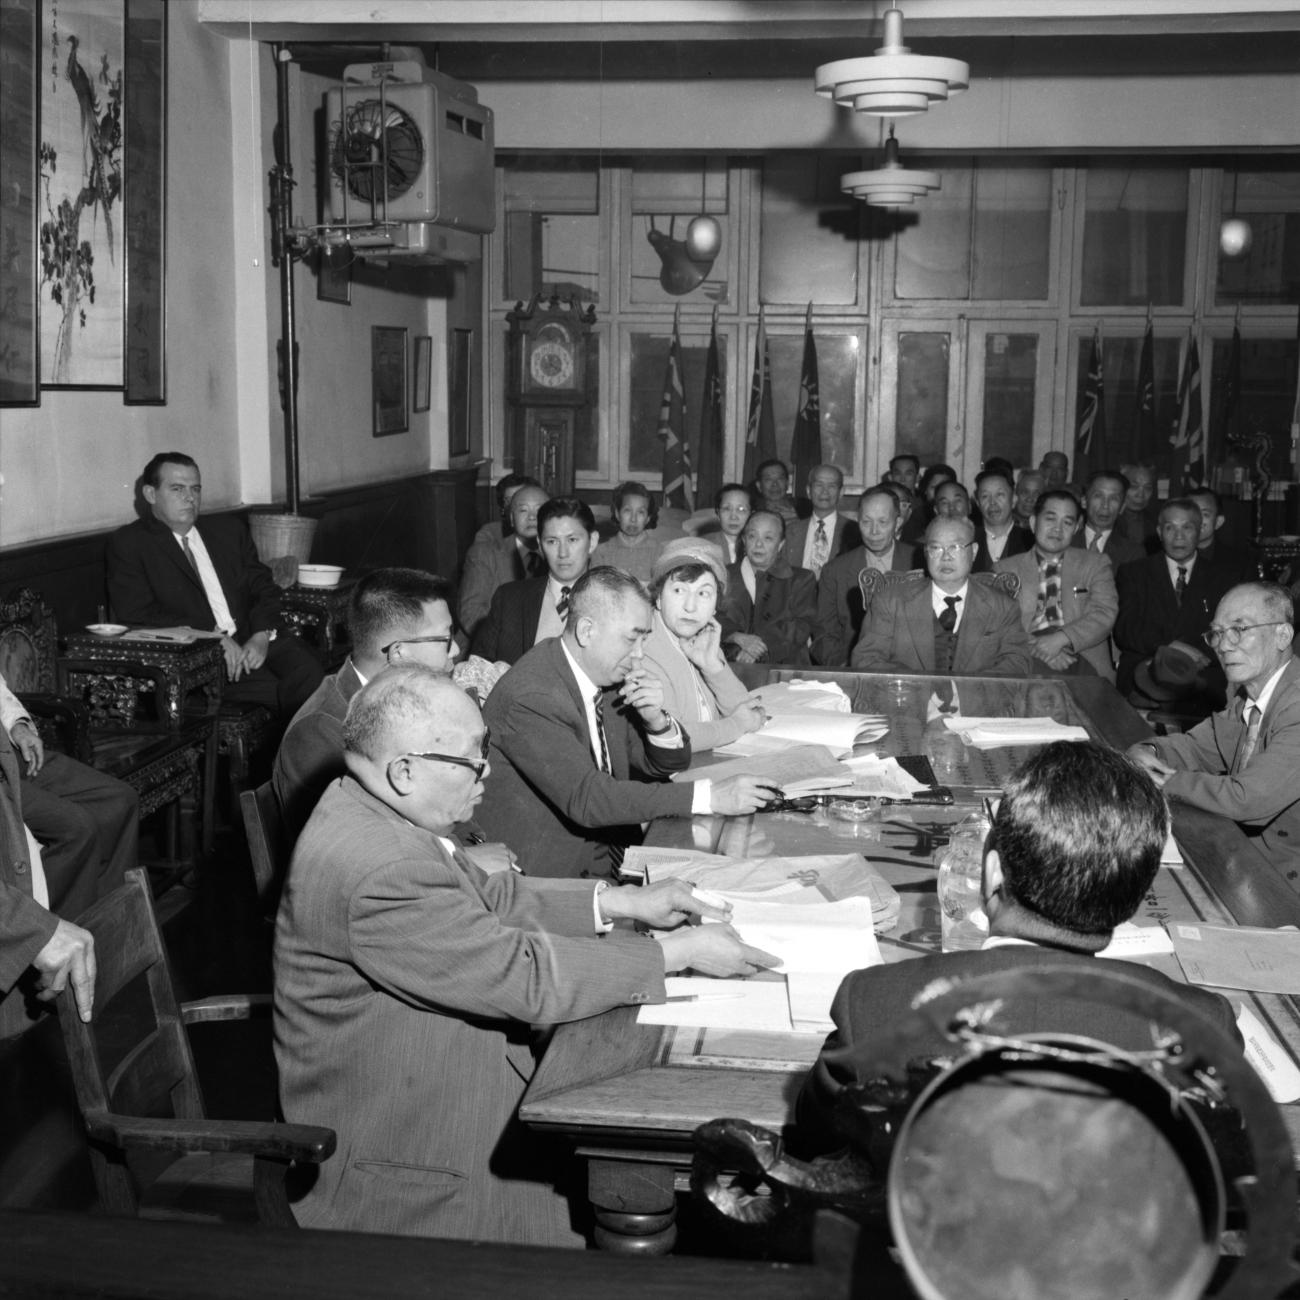 Wong Foon Sien sitting at a table with five other people with other people sitting on rows of chairs.